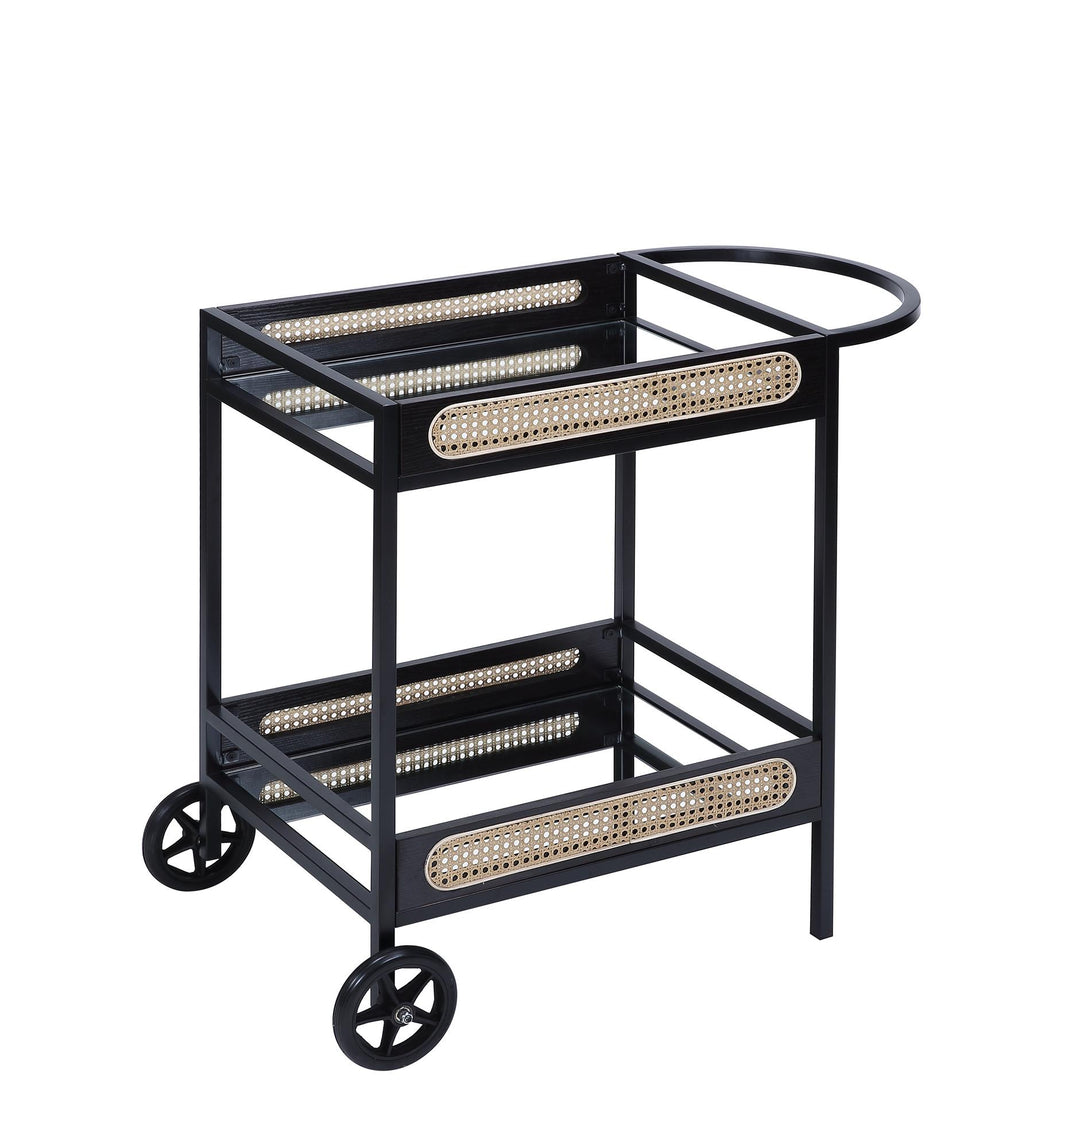 Colson rattan-inset bar cart with mirrored platforms -  Black